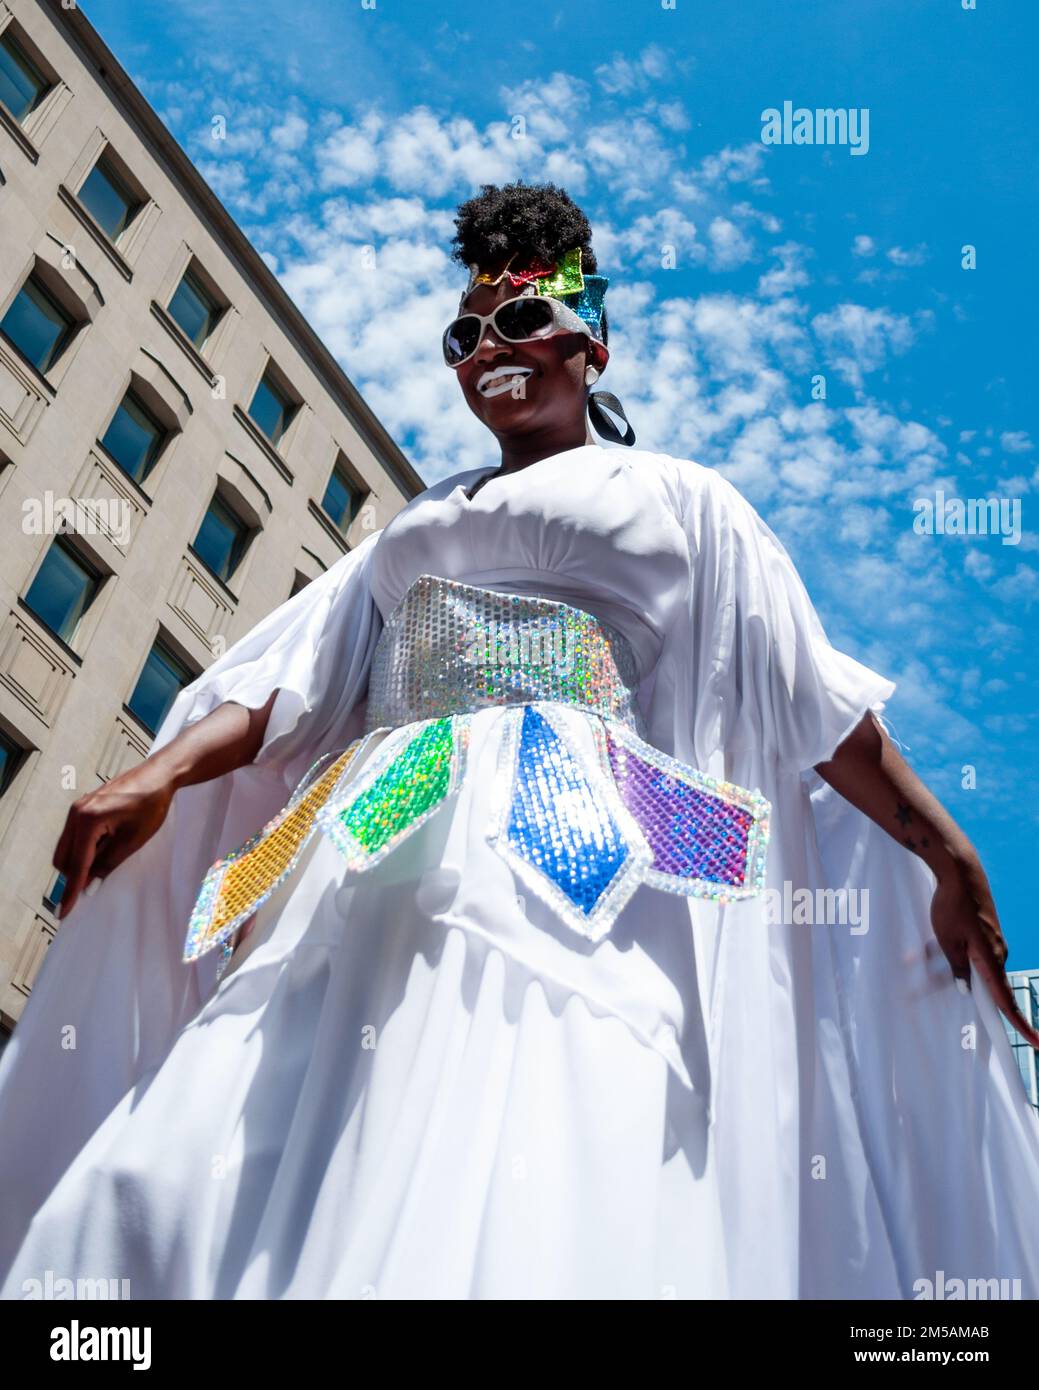 A person of African ethnicity in stilts walks in Bloor St. Low angle view. The event celebrates the LGBTQ community in the city. Stock Photo